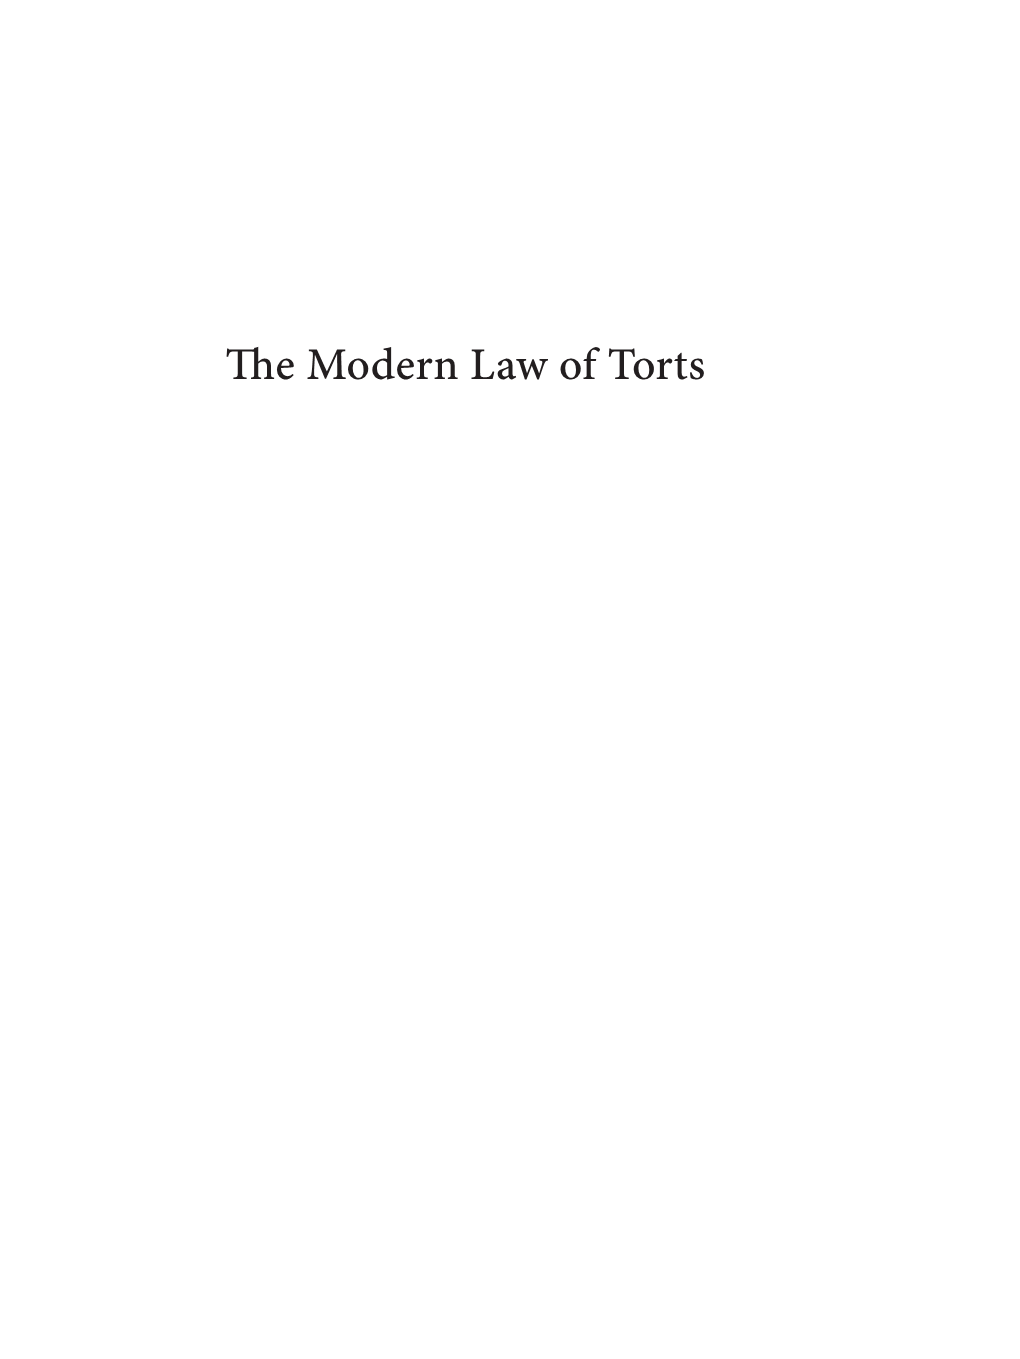 The Modern Law of Torts